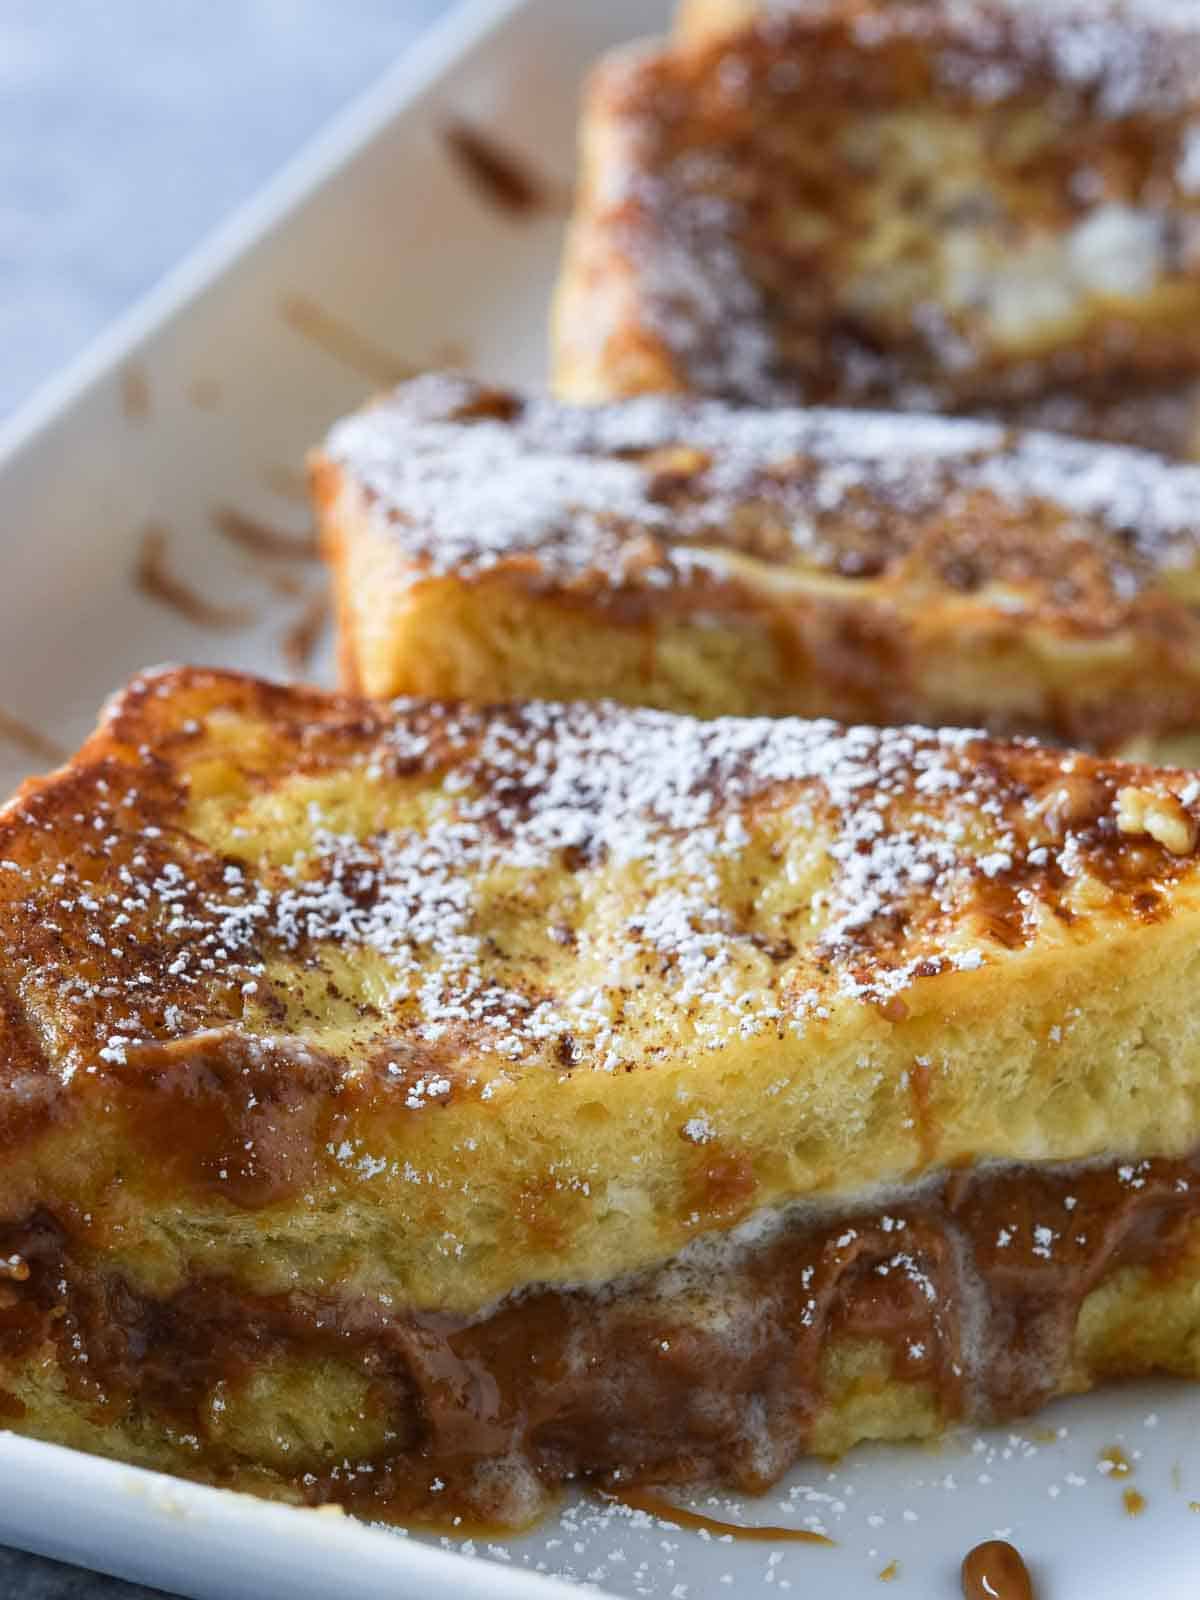 Angled view of stuffed French toast.